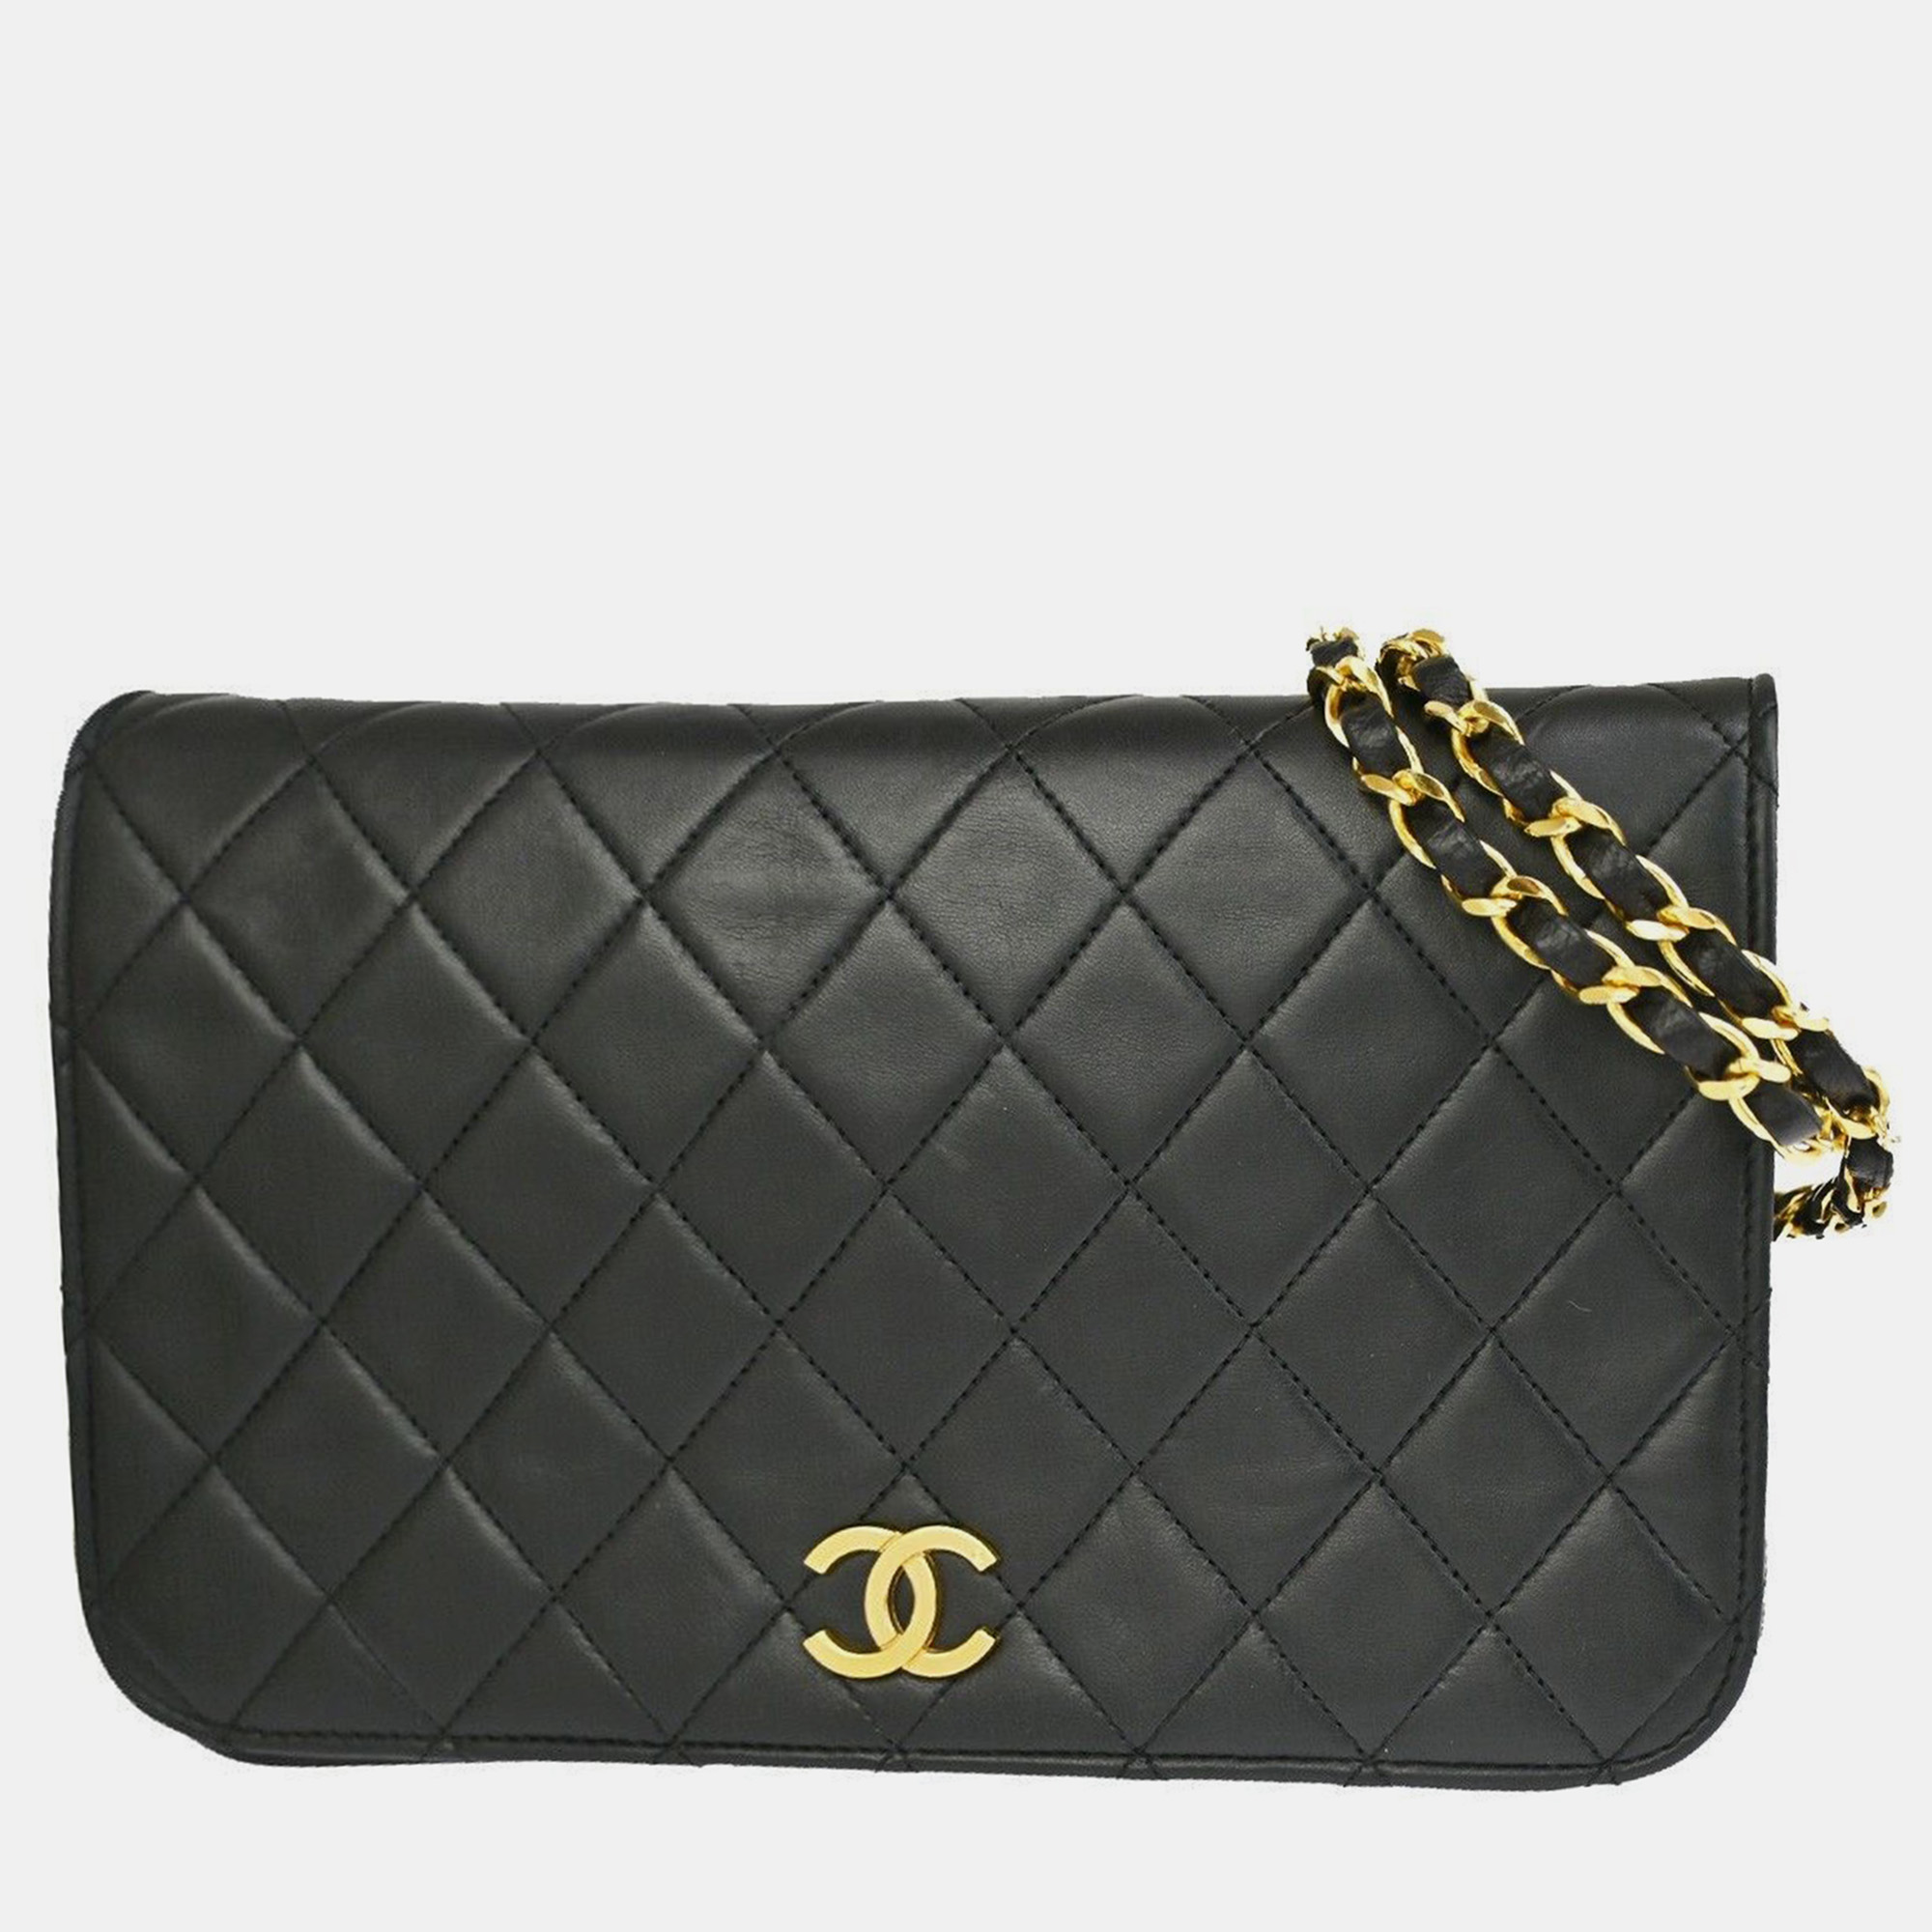 Pre-owned Chanel Black Quilted Leather Vintage Full Flap Bag